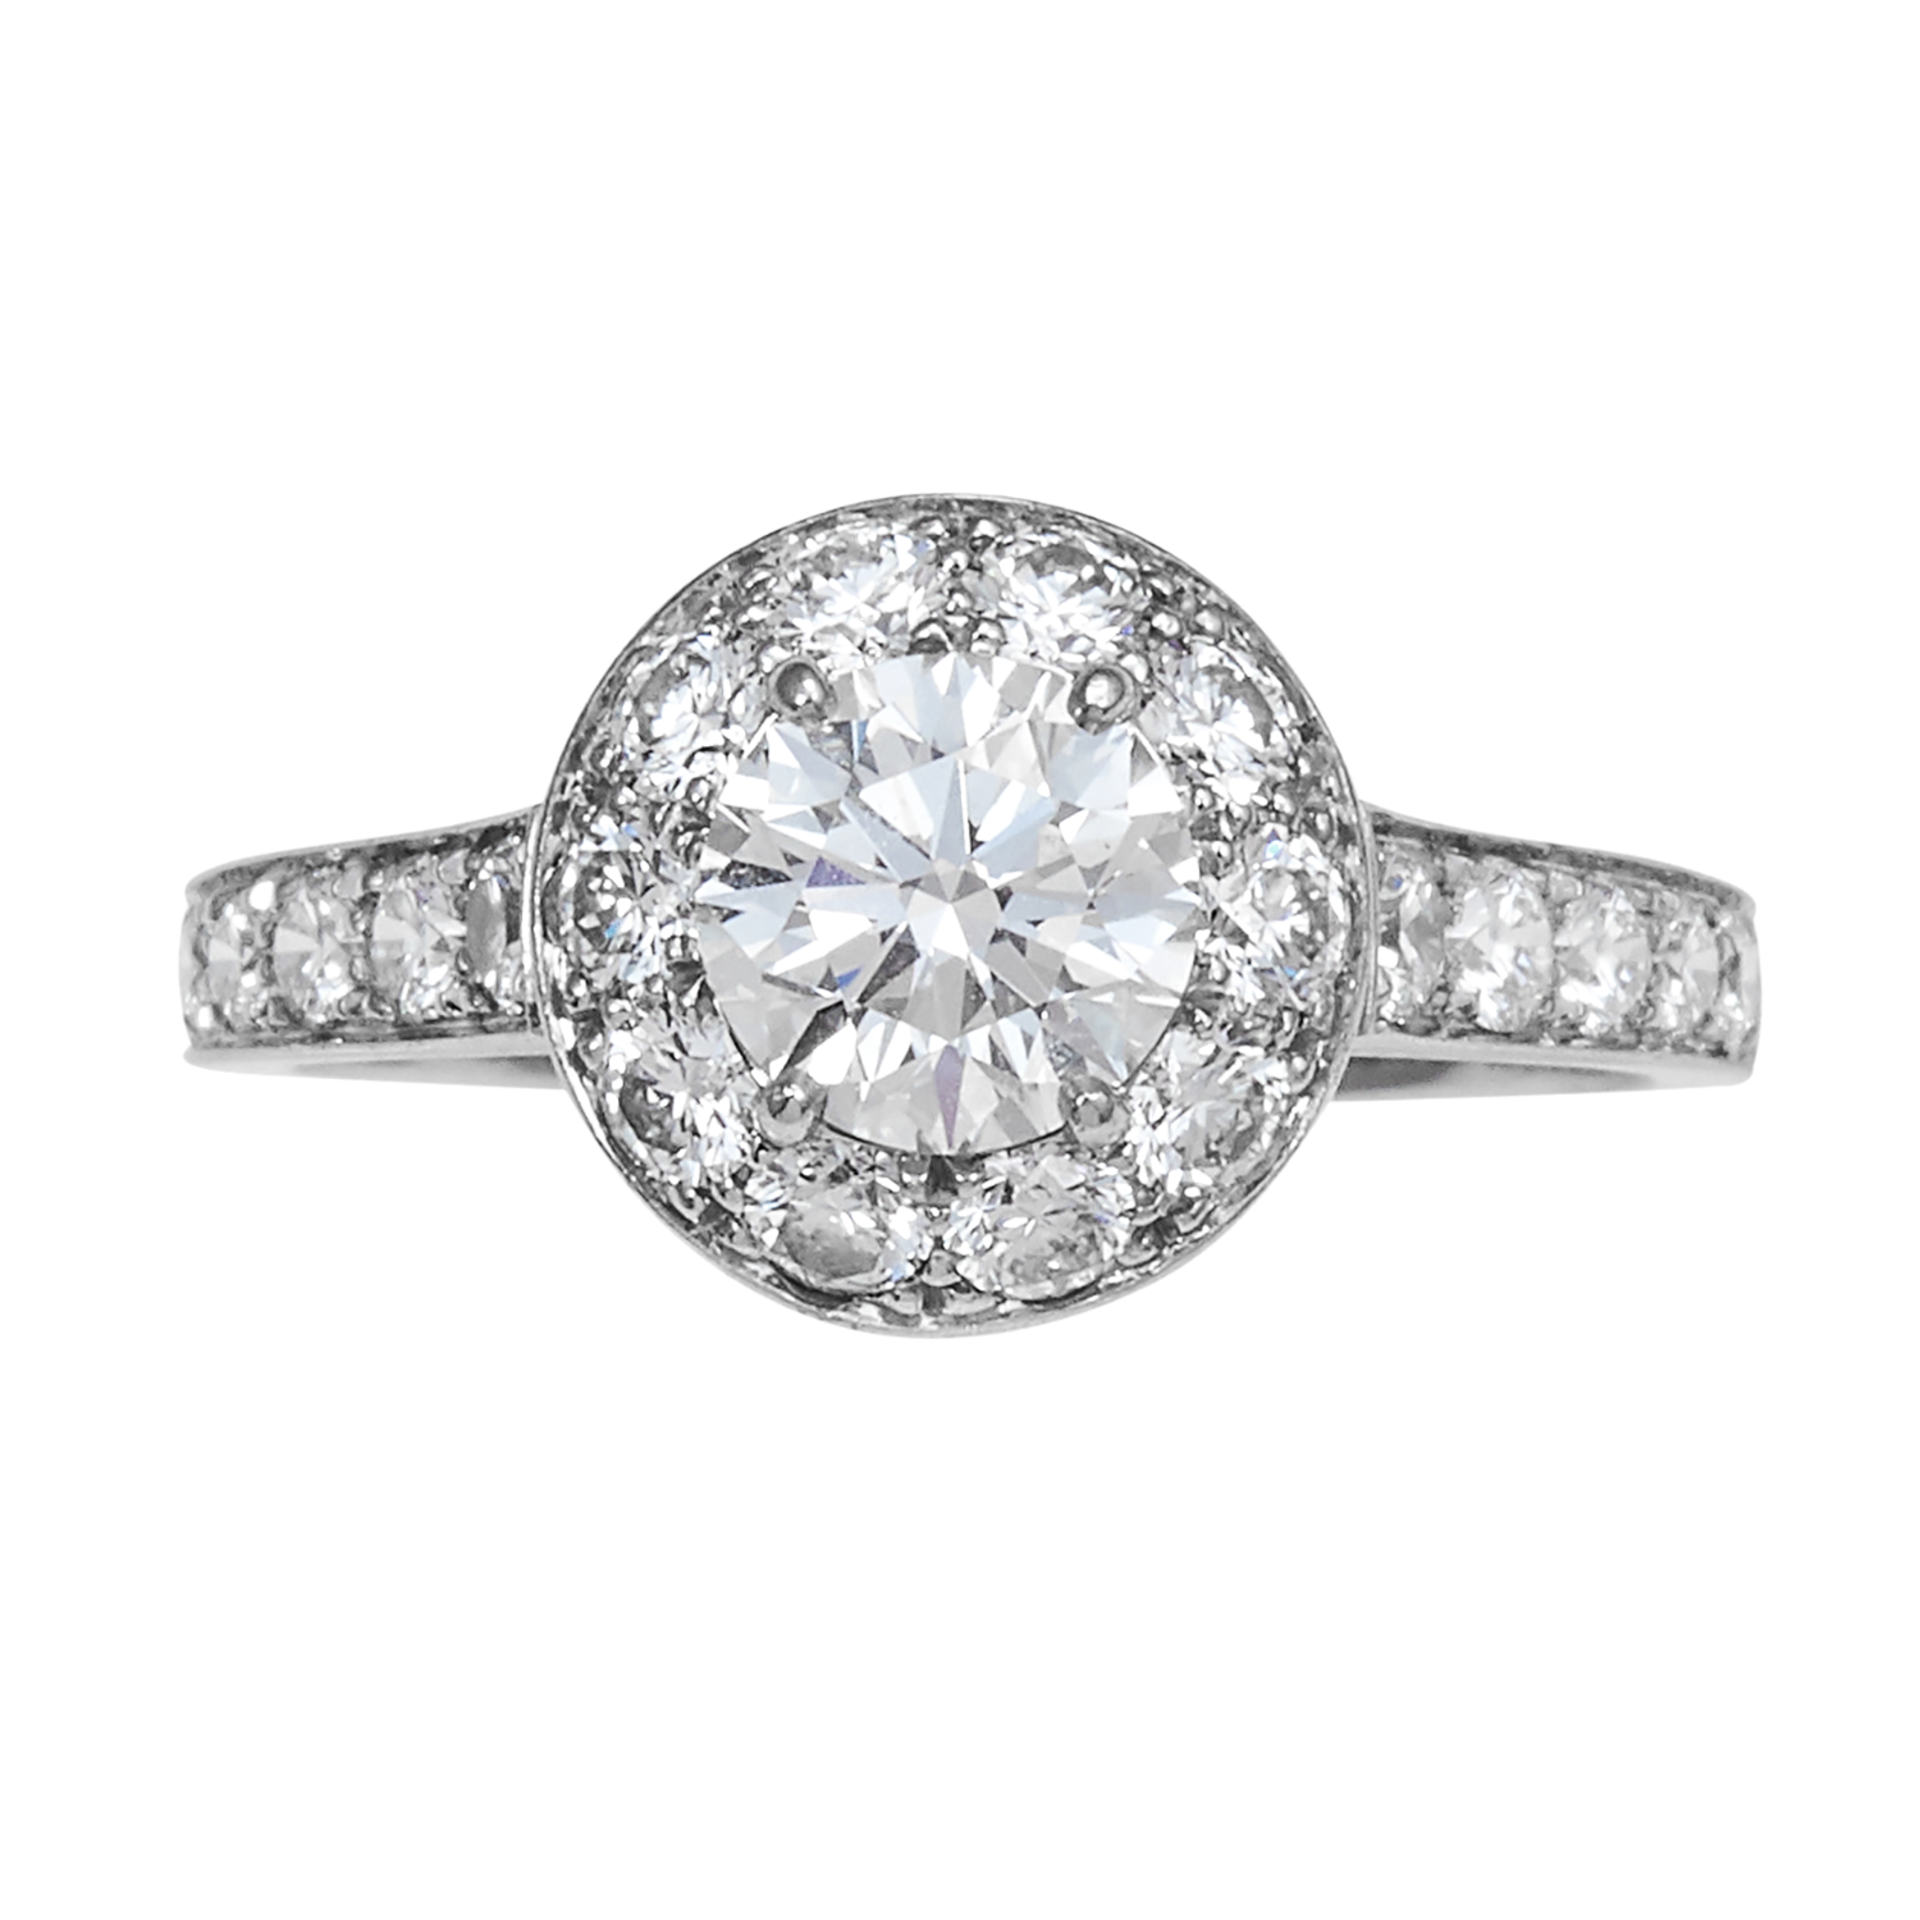 AN ICONE 1.0 CARAT DIAMOND ENGAGEMENT RING, VAN CLEEF & ARPELS in platinum, set with a central round